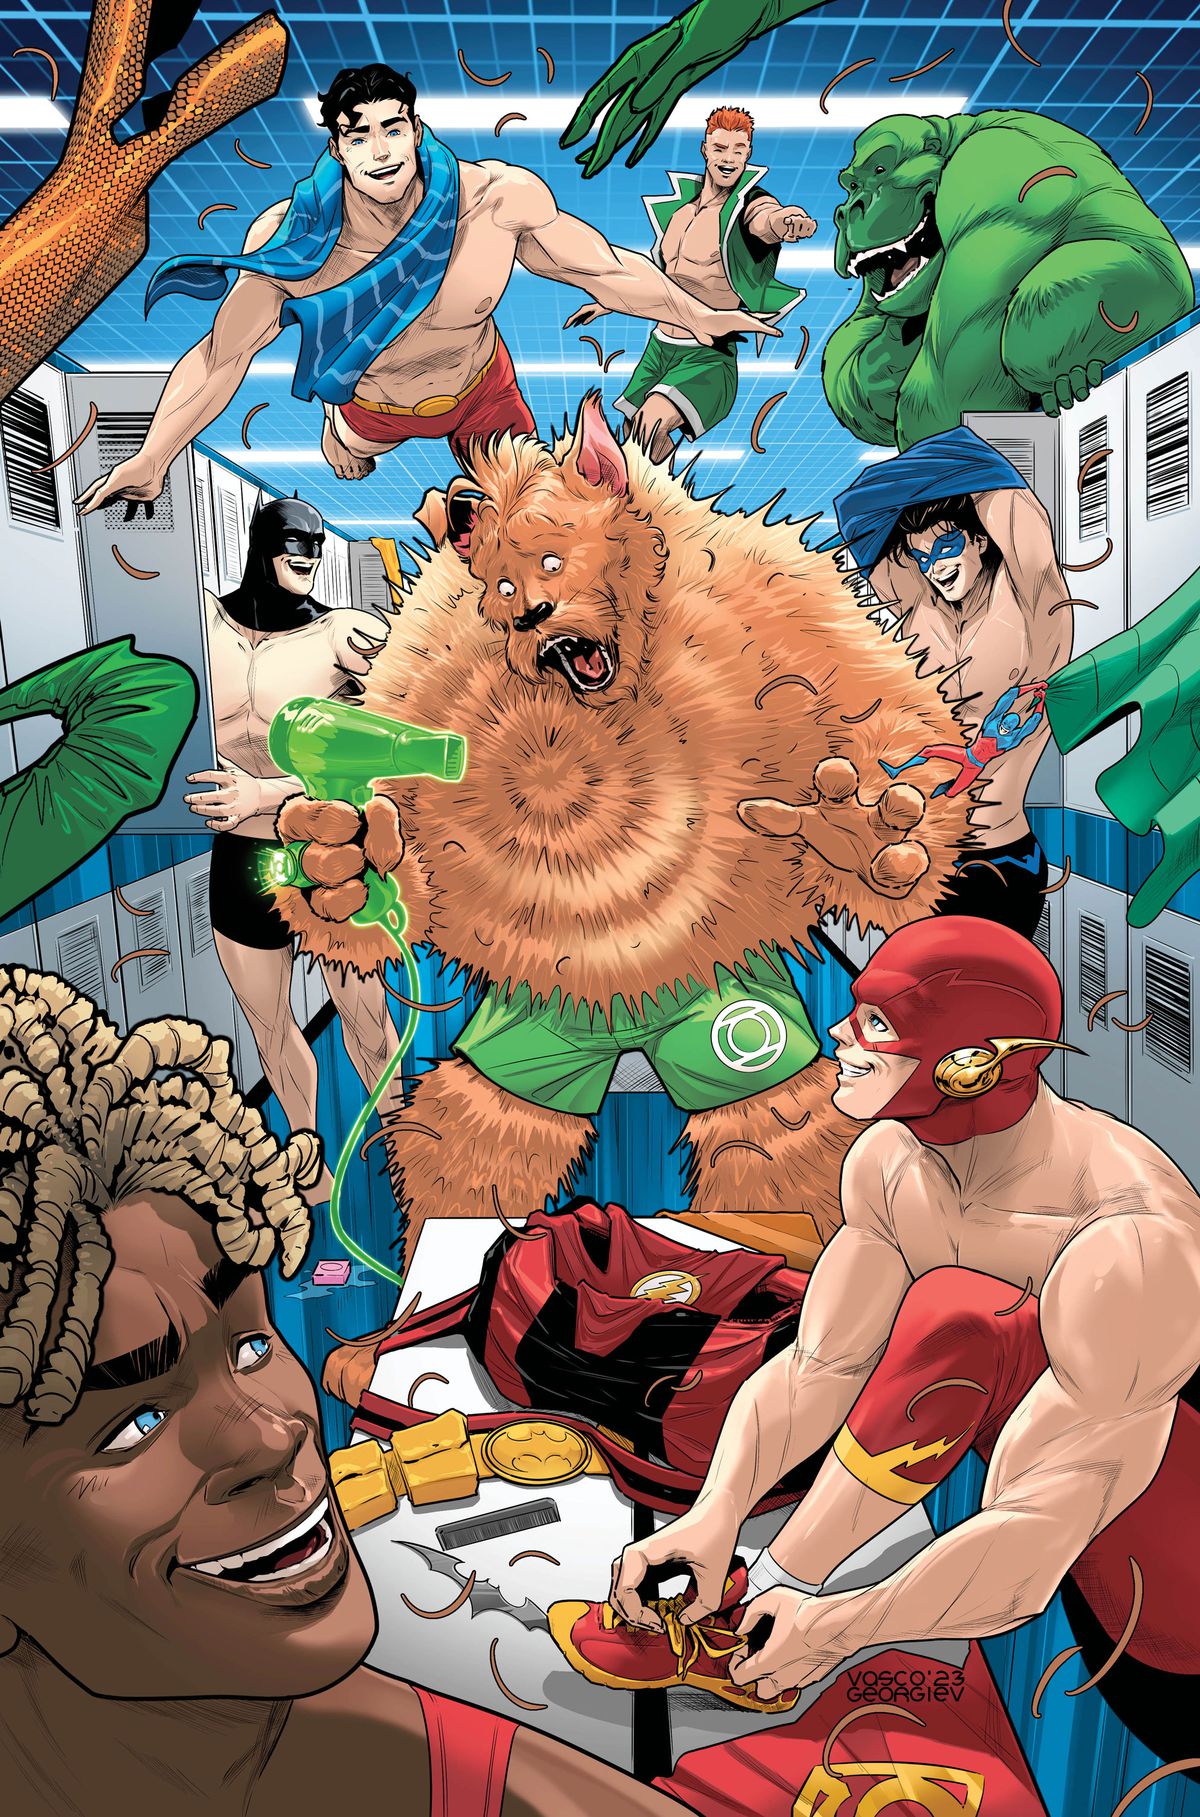 G’nort looks surprised as he poofs his fur out with a hair dryer in a locker room filled with laughing DC superheroes getting into their swimming togs on the cover for G’nort’s Illustrated Swimsuit Edition (2023).